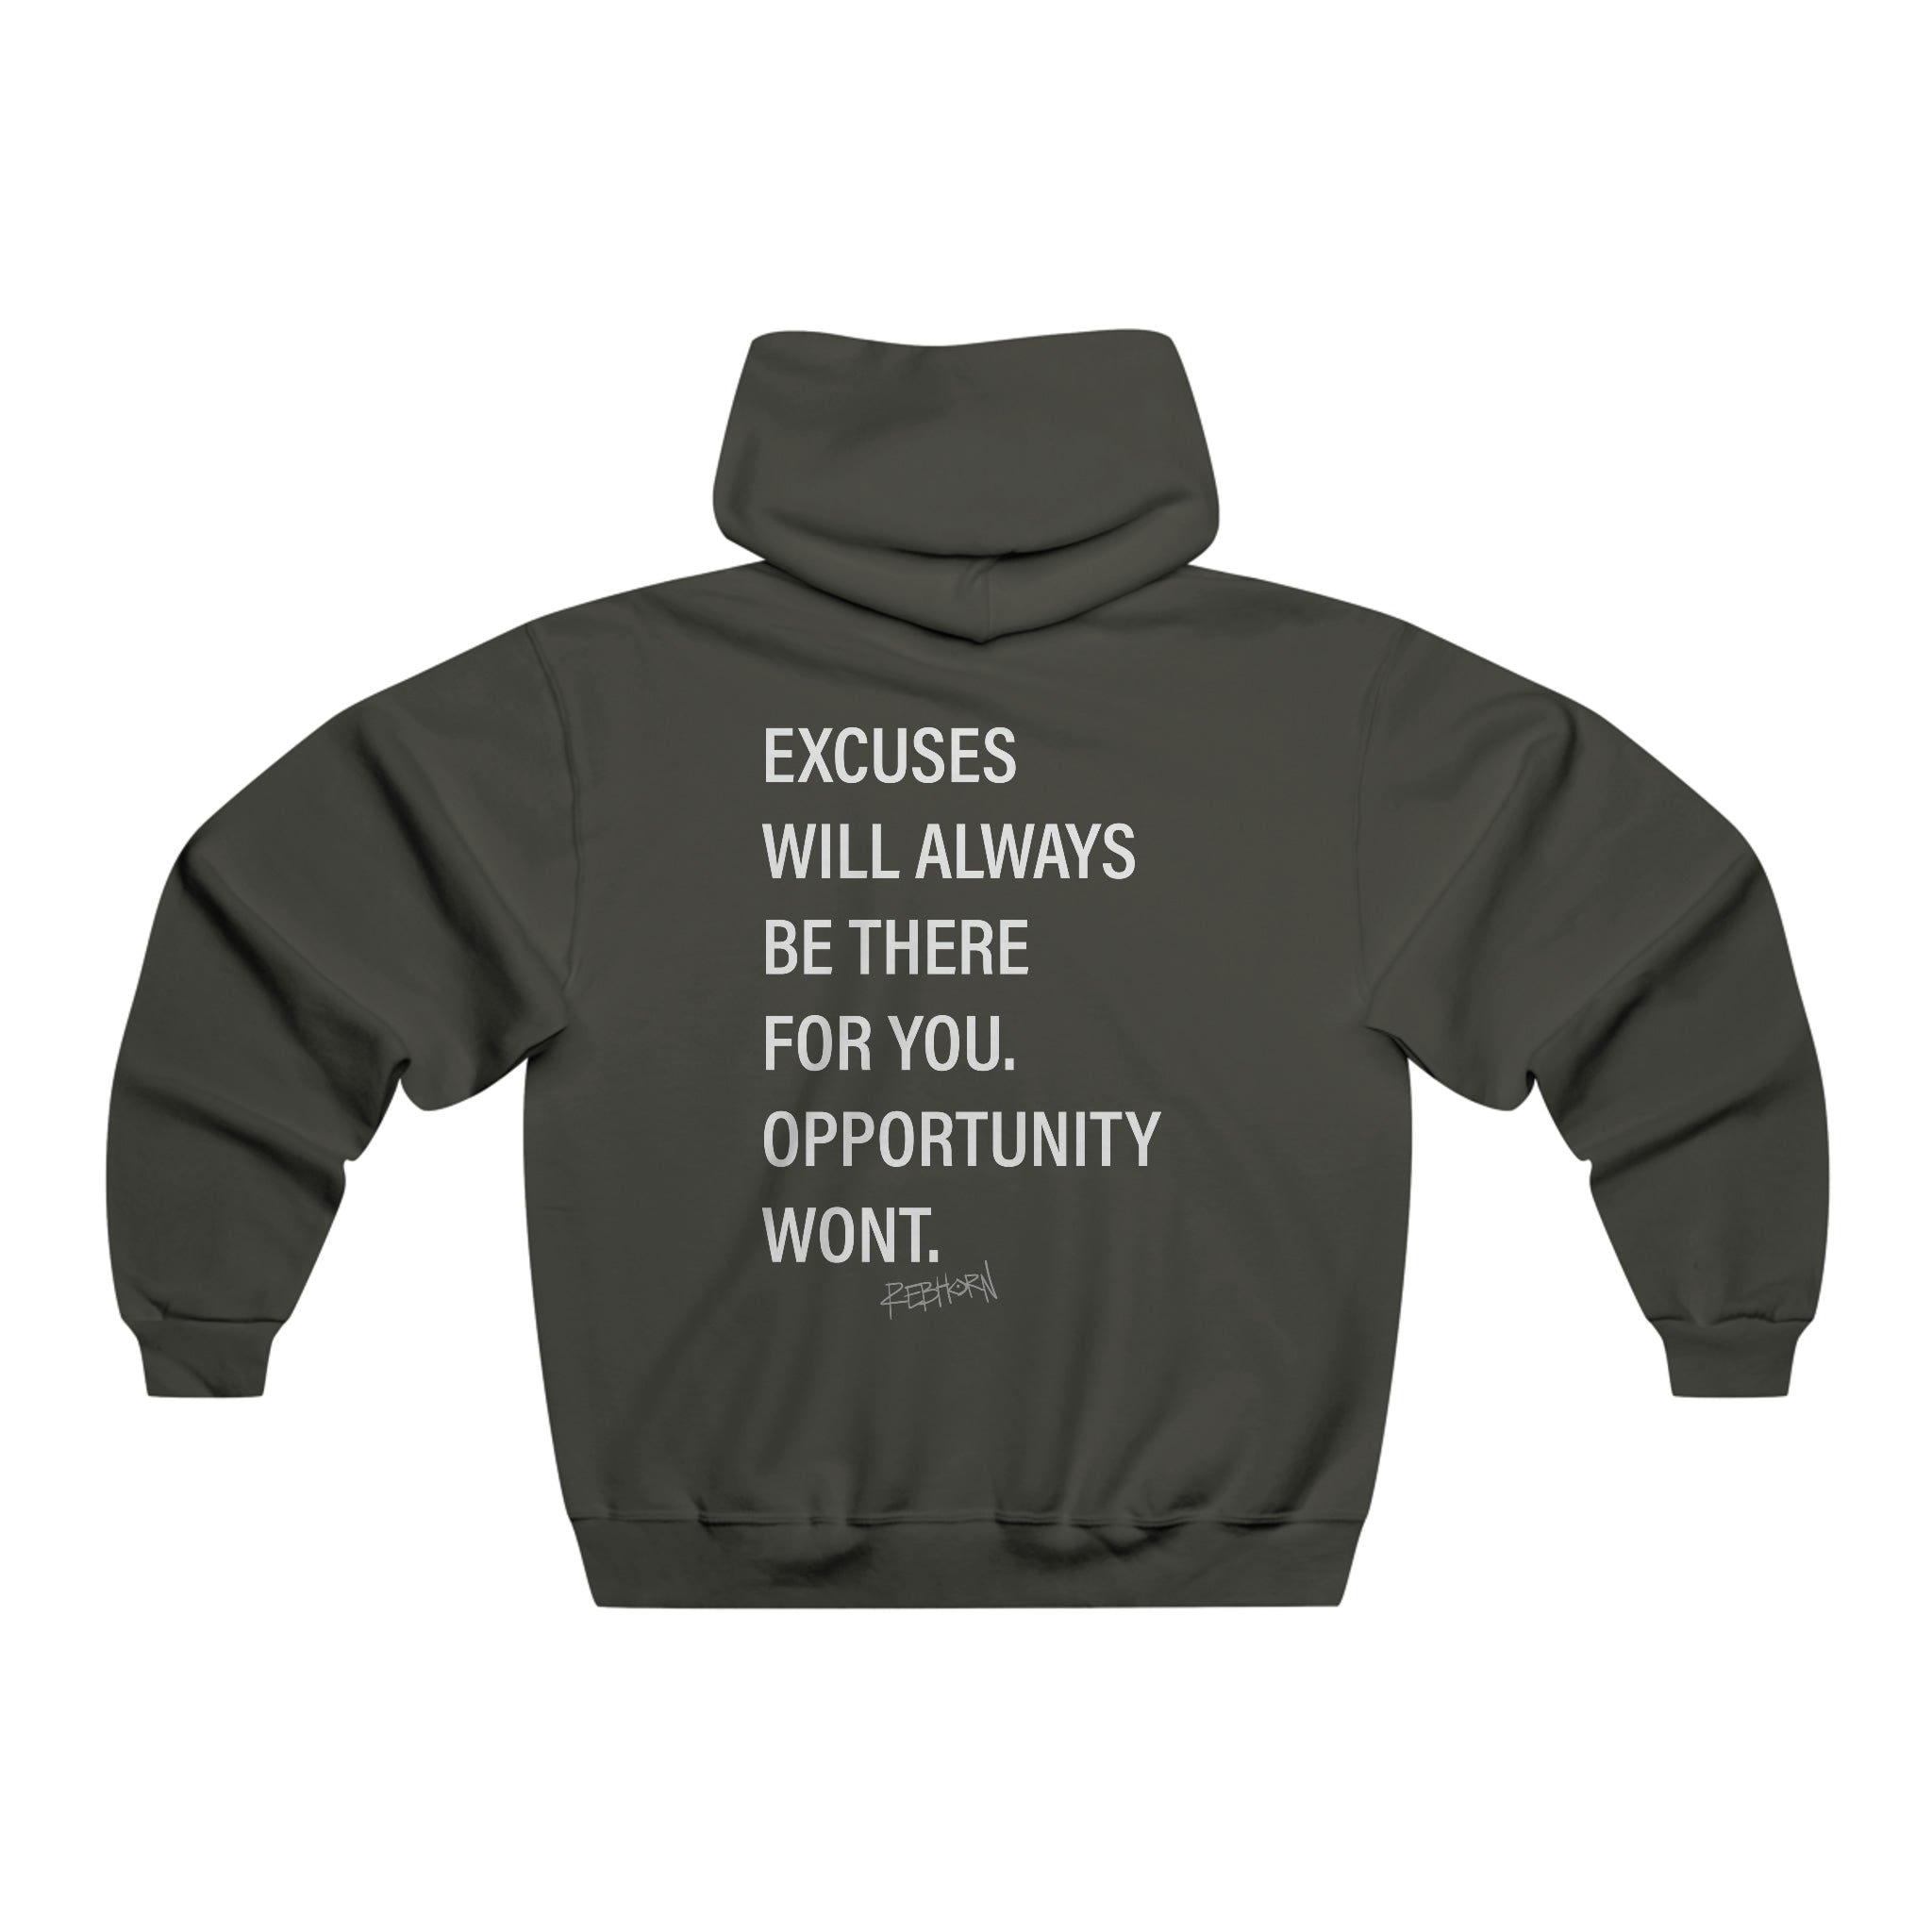 Excuses Will Always Be There For You Hooded Sweatshirt - REBHORN DESIGN